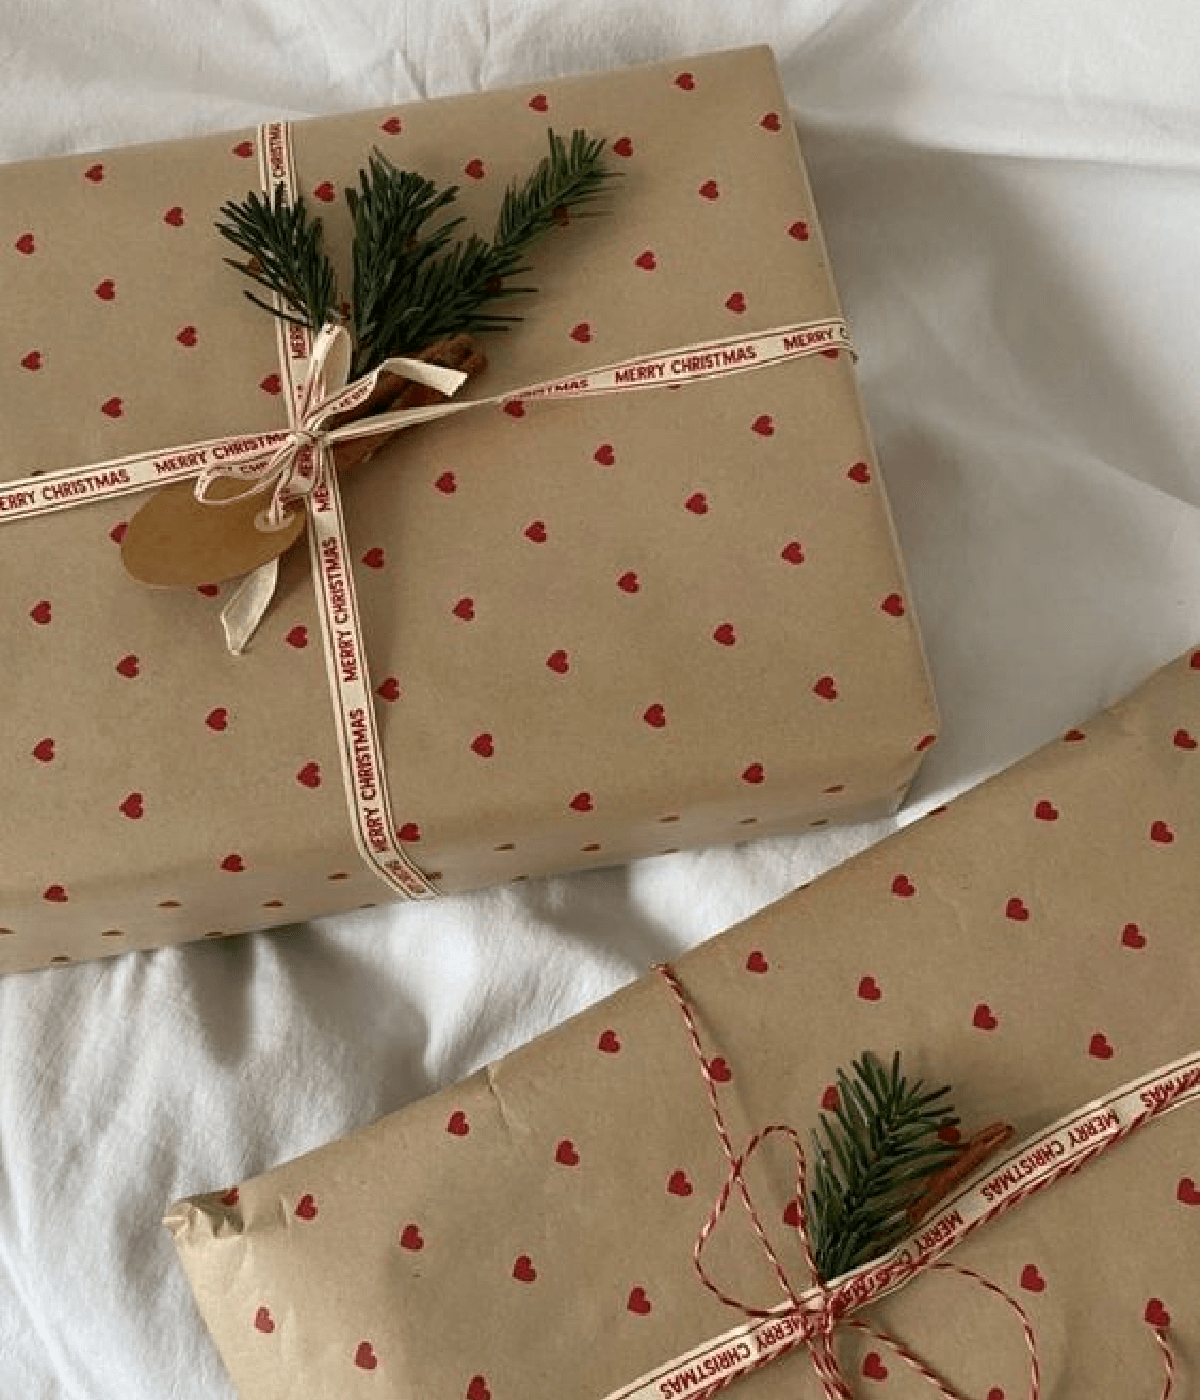 How to Get the Best Gifts for Everyone on Your List (All in One Day)